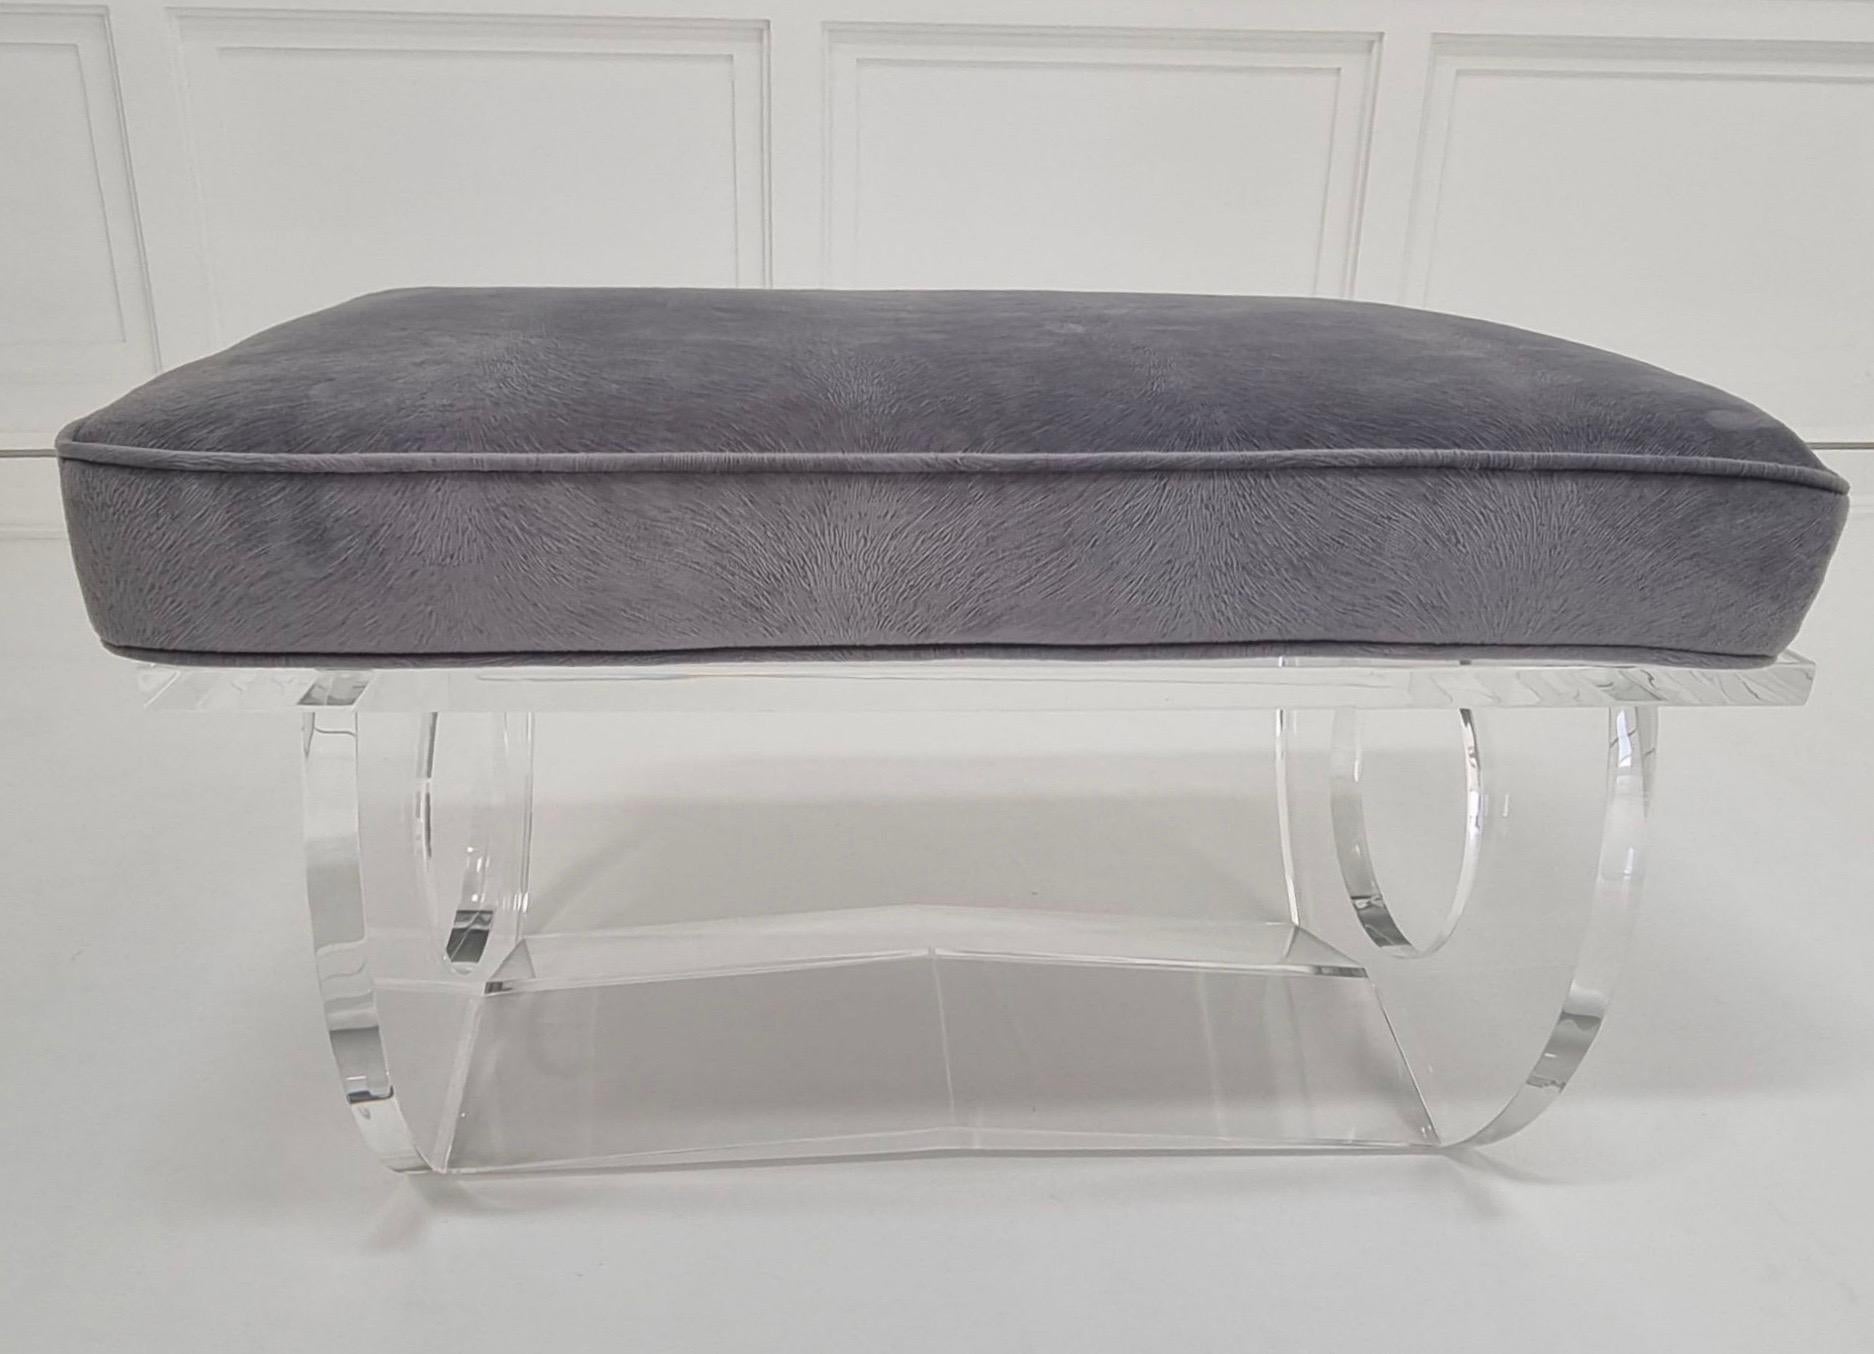 Aubury Acrylic Bench by Jonathan Franc - the rectangular 4 inch cushion over a acrylic seat supported by two shaped legs connected by a raising stretcher. Fabric 2 yards, COM